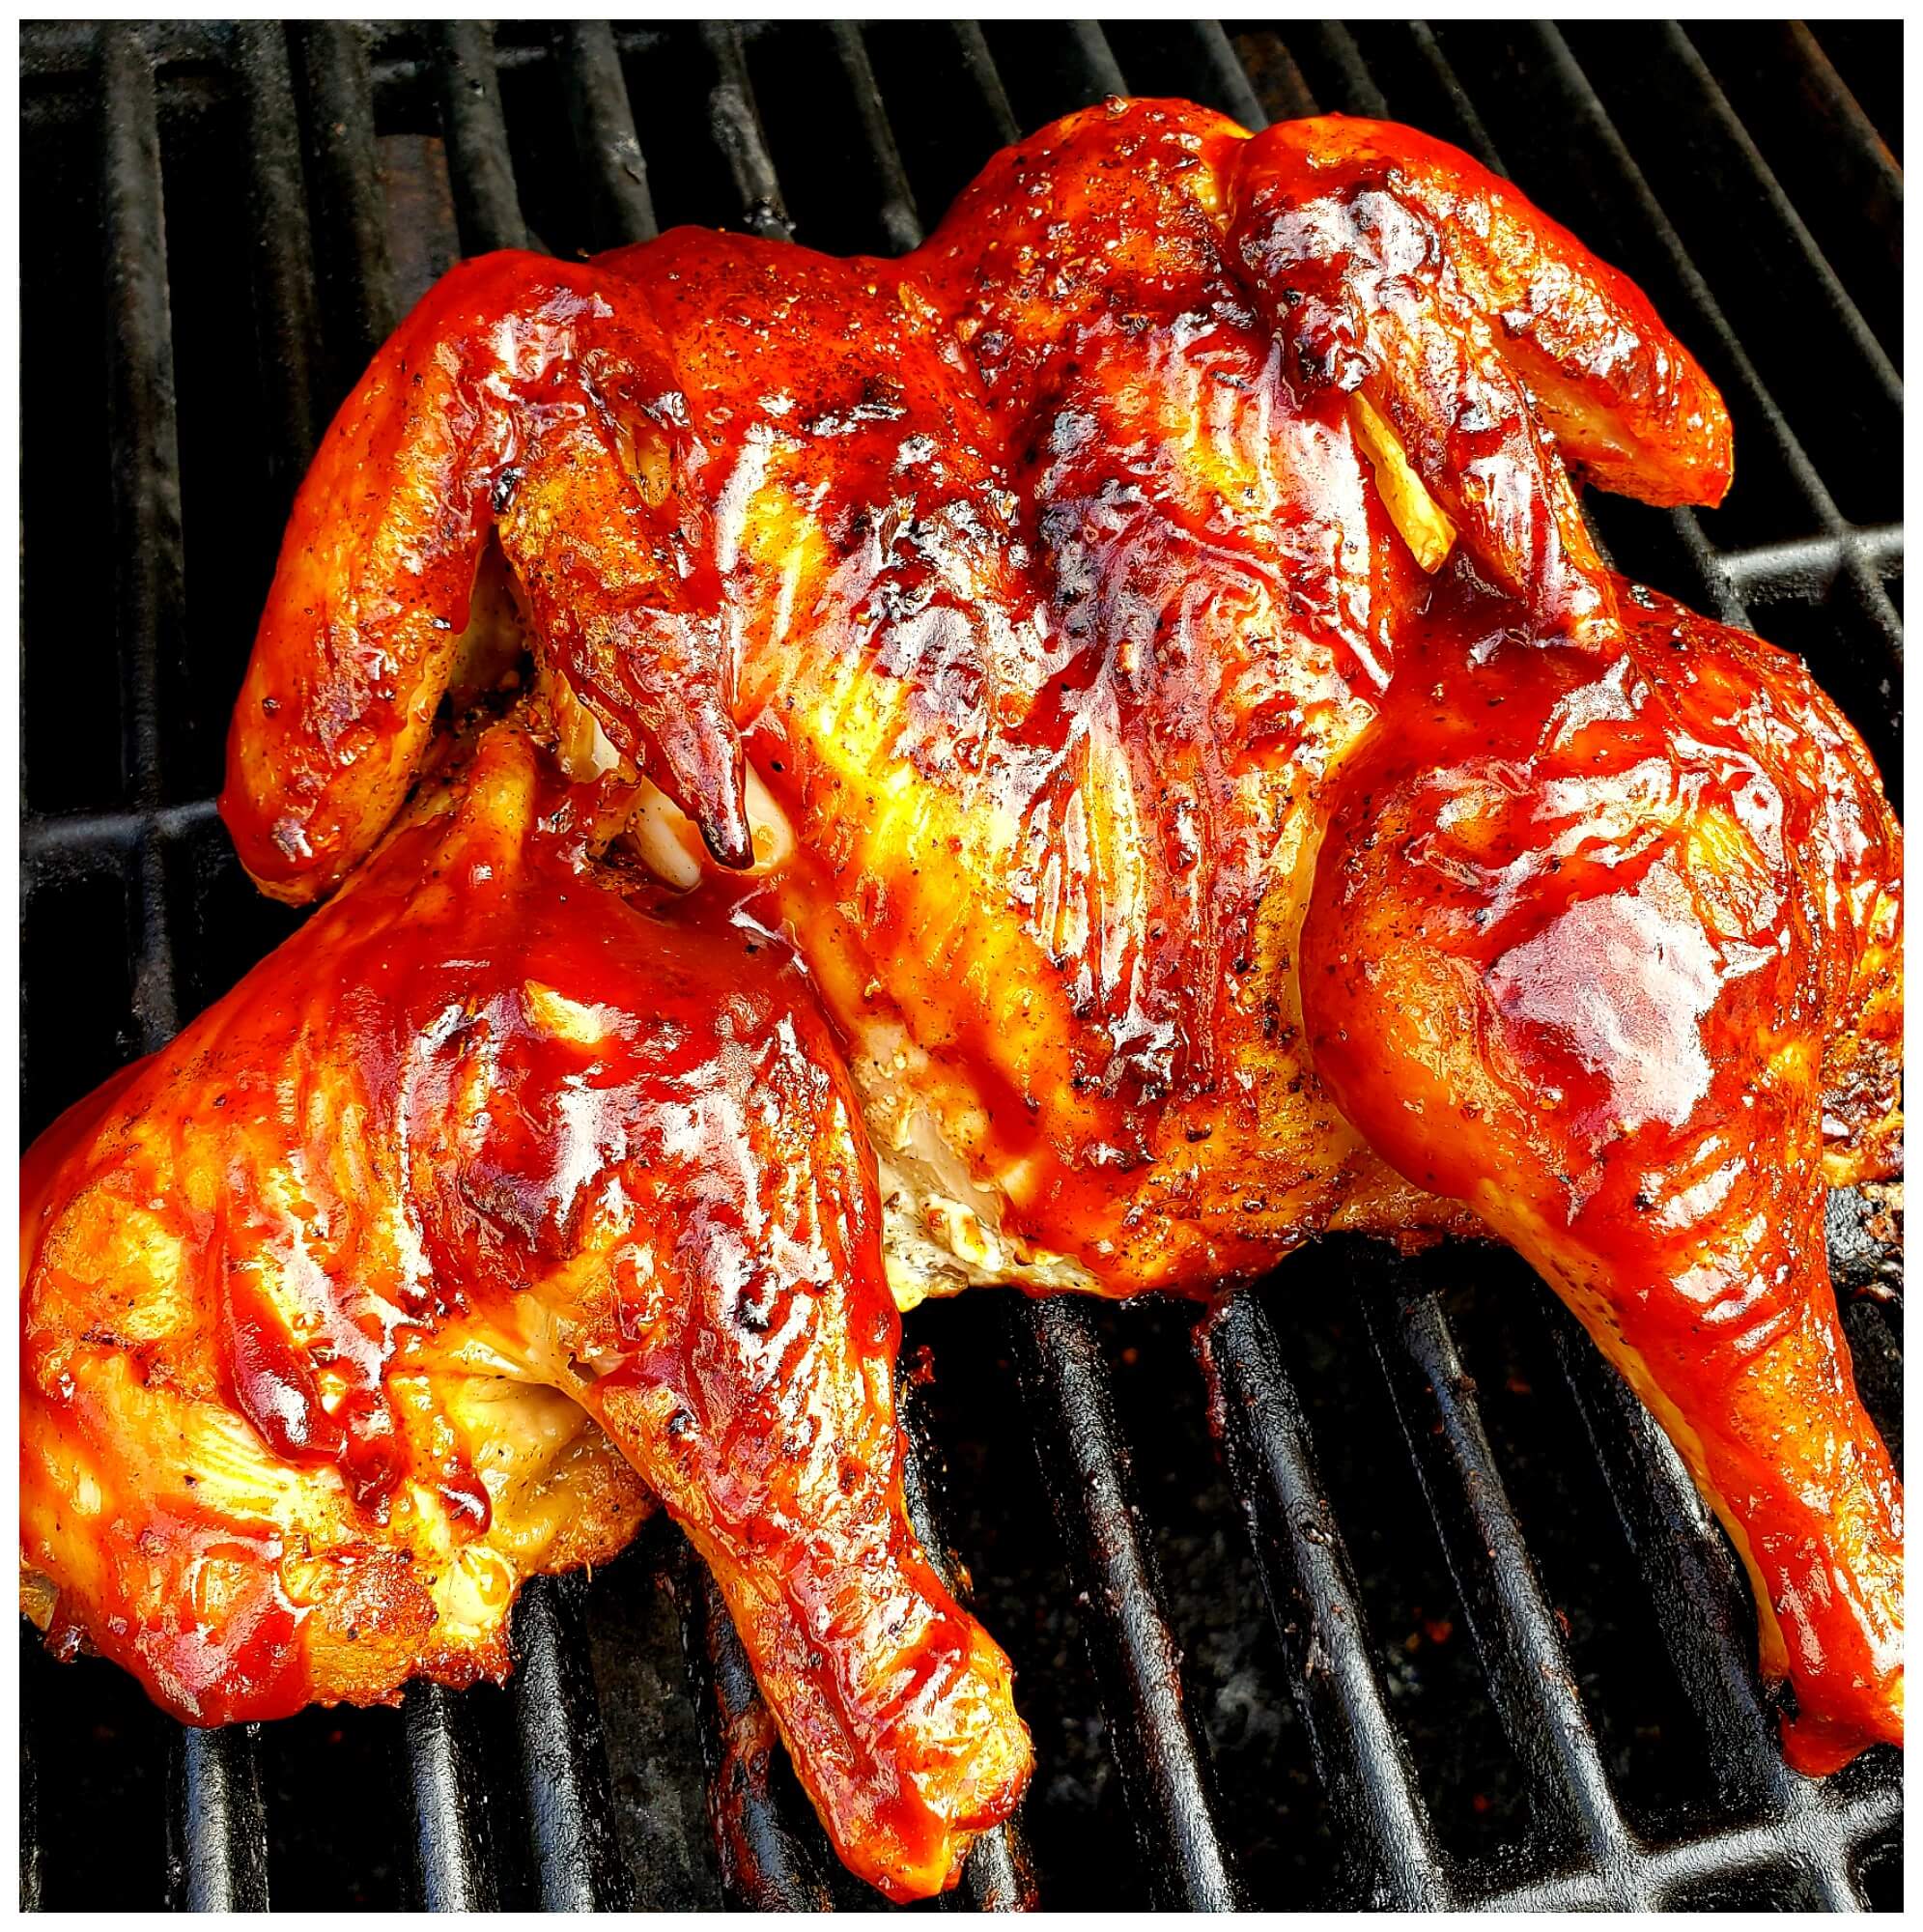 Gas Grilled Whole Chicken Recipe Spatchcock Style - Julias Simply Southern